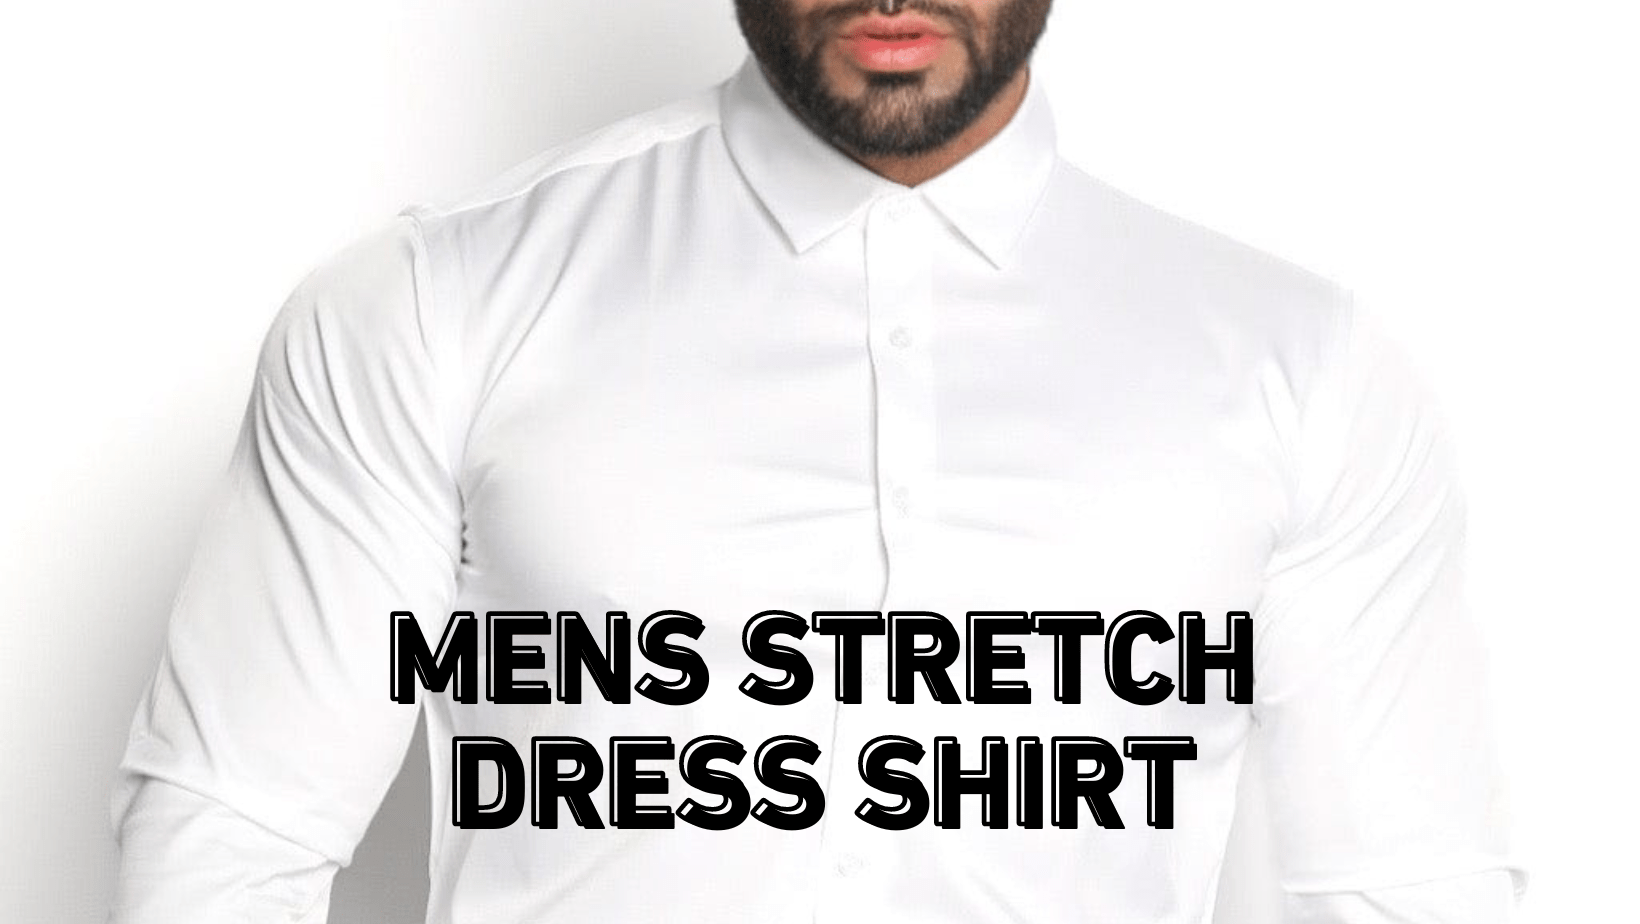 What's So Good About Stretchy Dress Shirts?